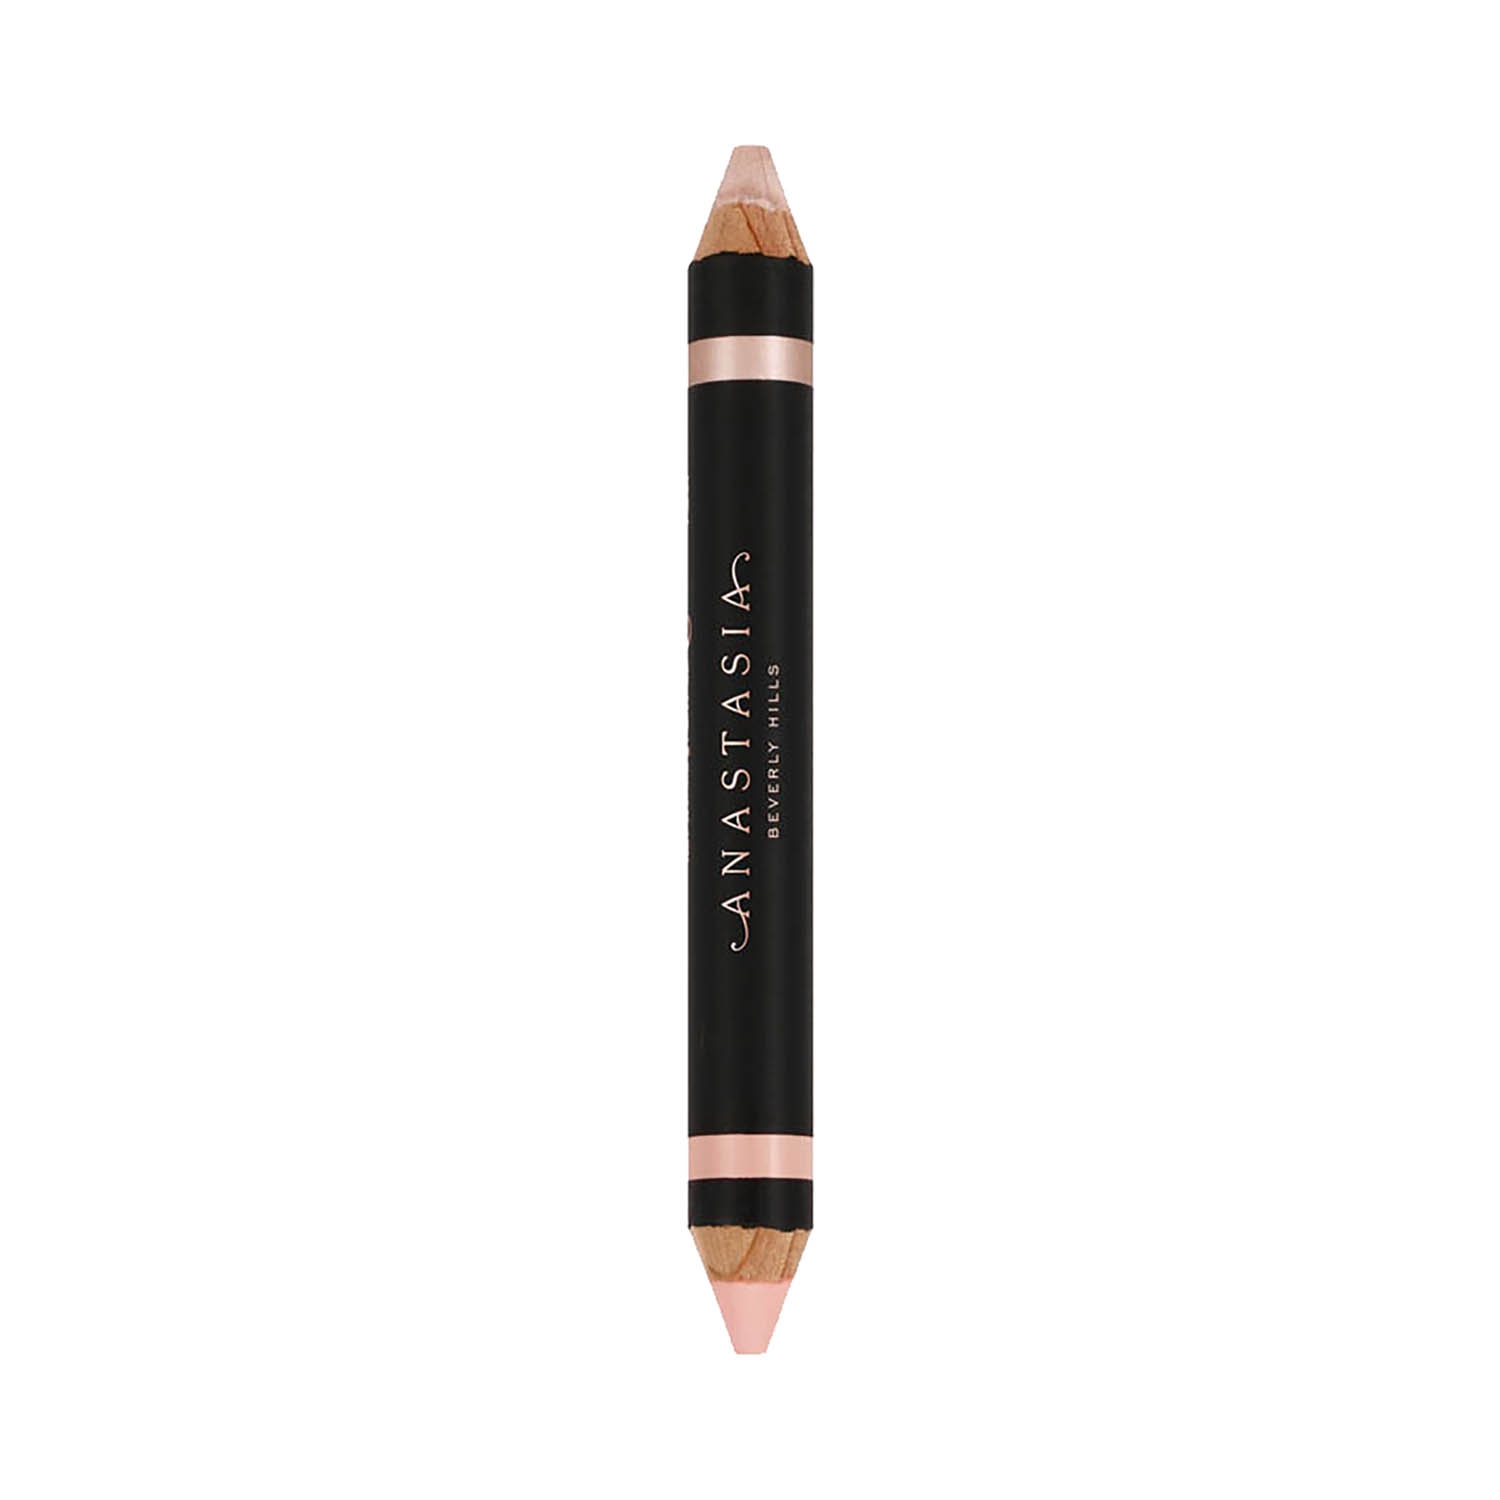 Anastasia Beverly Hills | Anastasia Beverly Hills Highlighting Duo Pencil - Matte Camille/Sand Shimmer (4.8g)